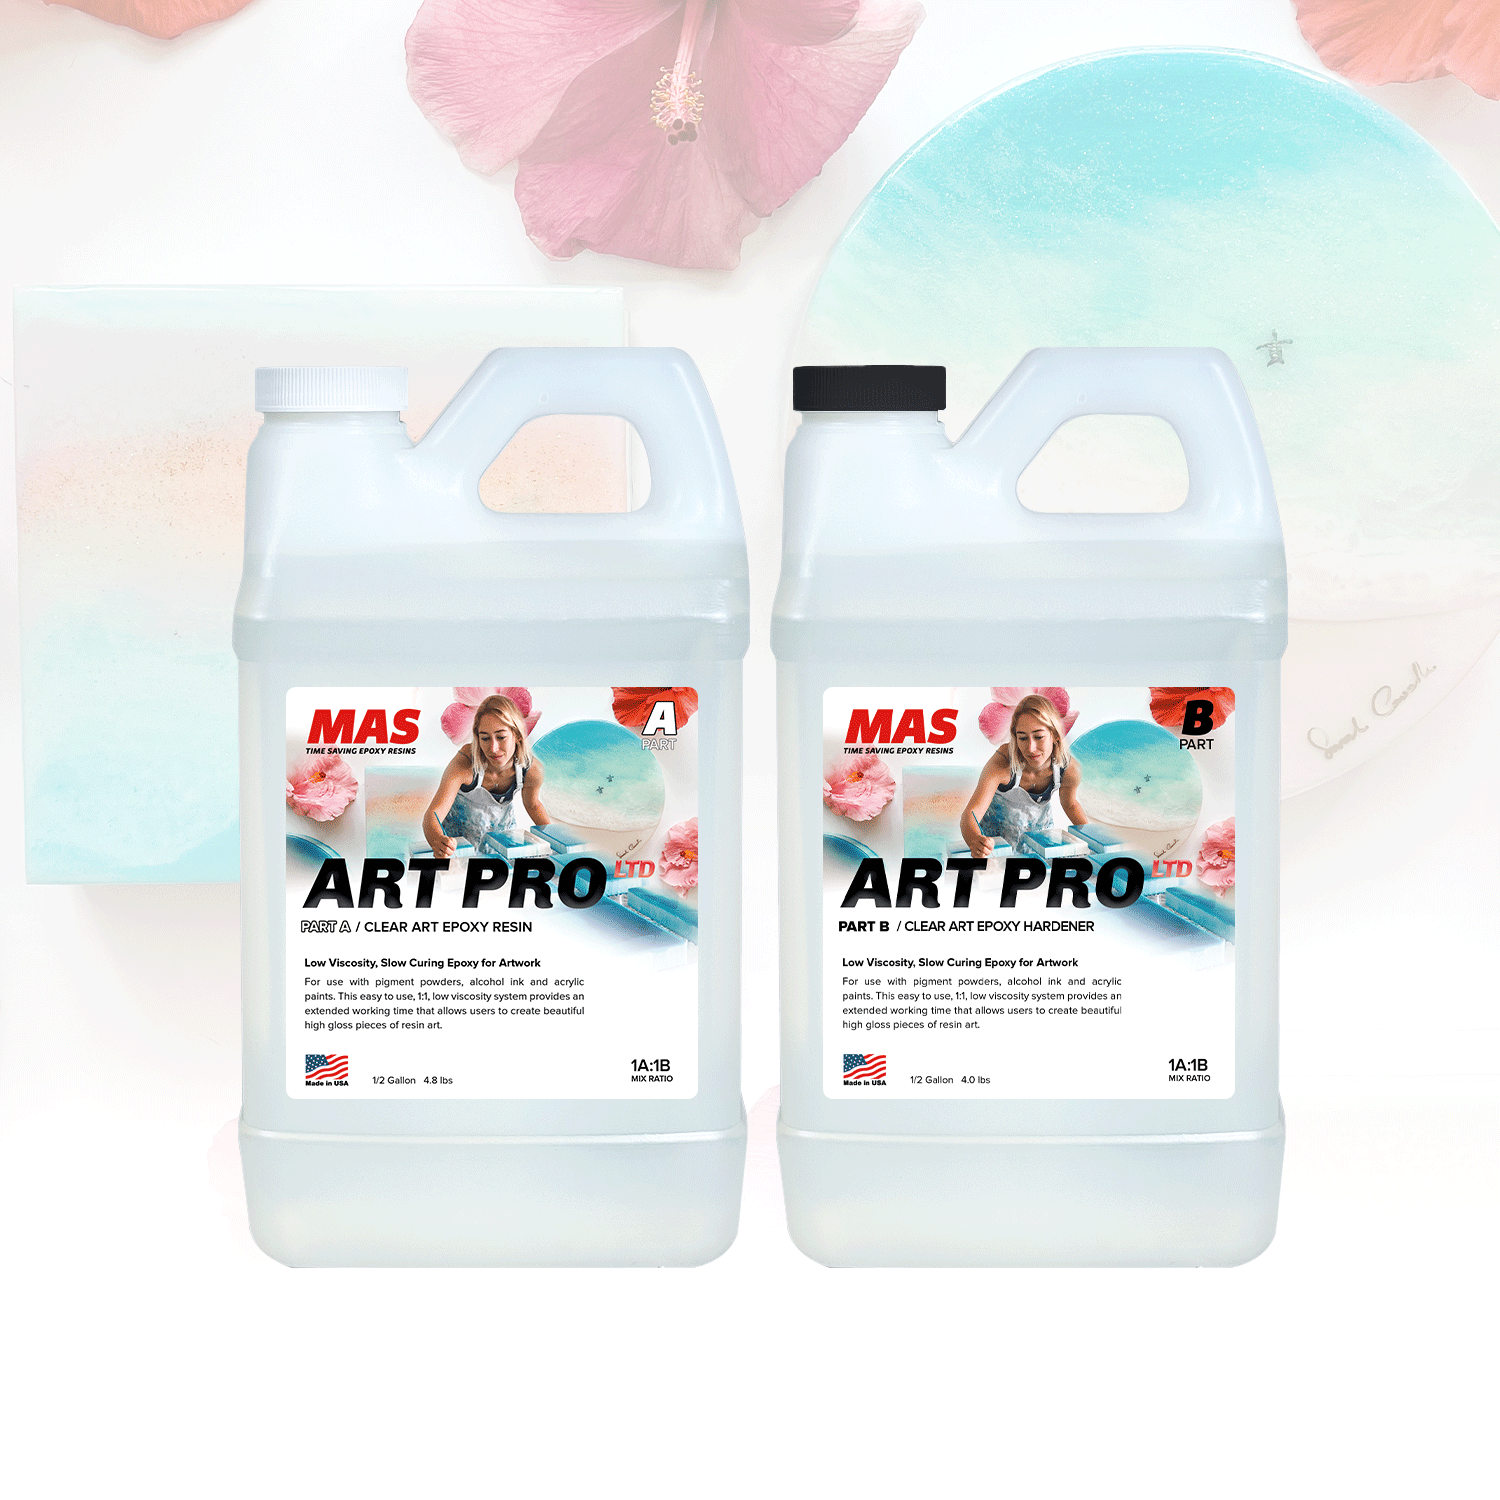 What is the difference between this product and Art Pro?